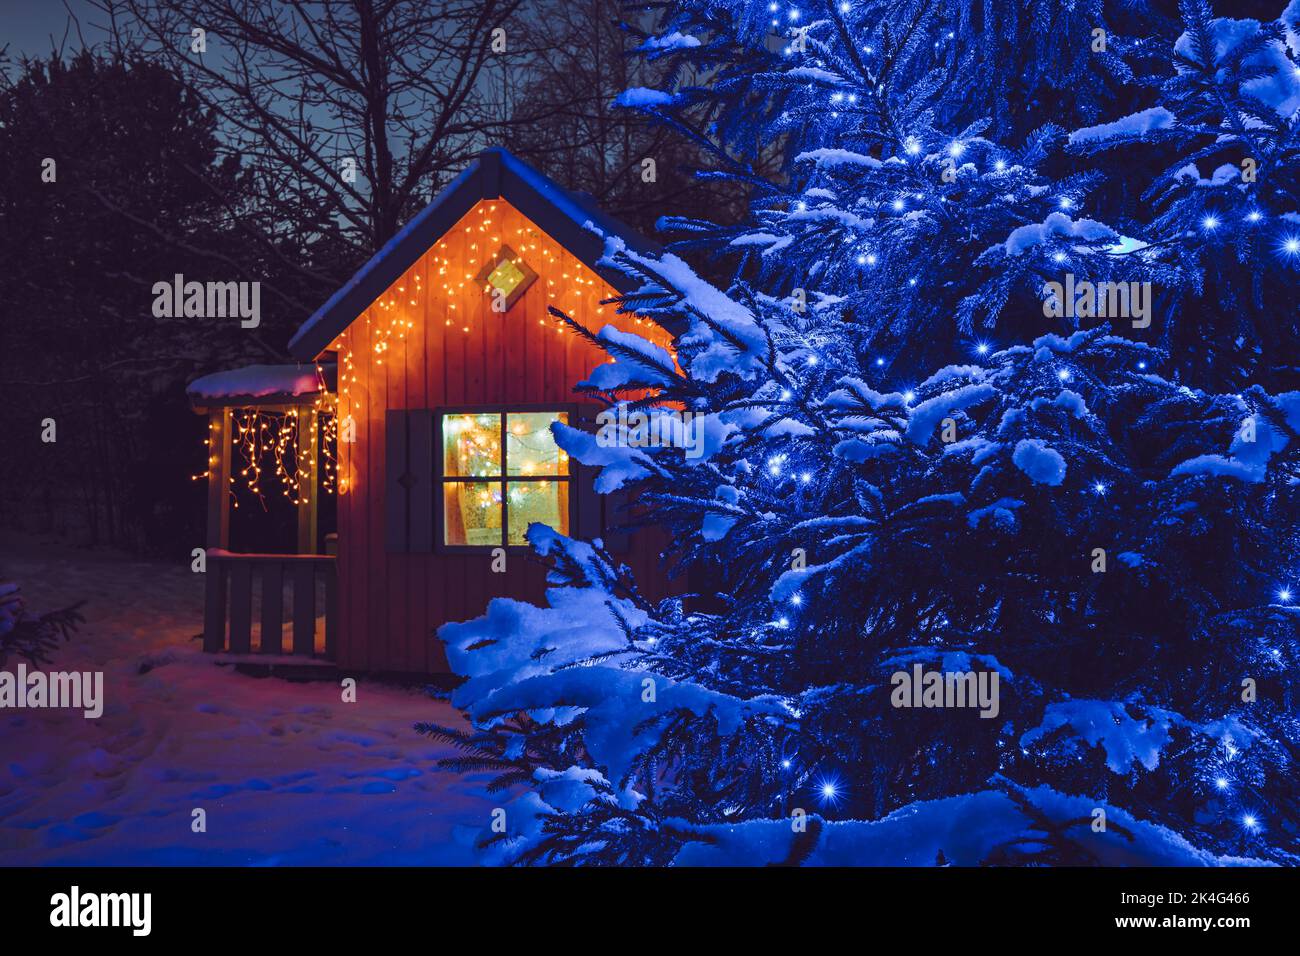 Cute wood play house in home garden, decorated with Christmas LED string lights outdoors in cold winder night. Decorated Christmas fir tree with blue. Stock Photo